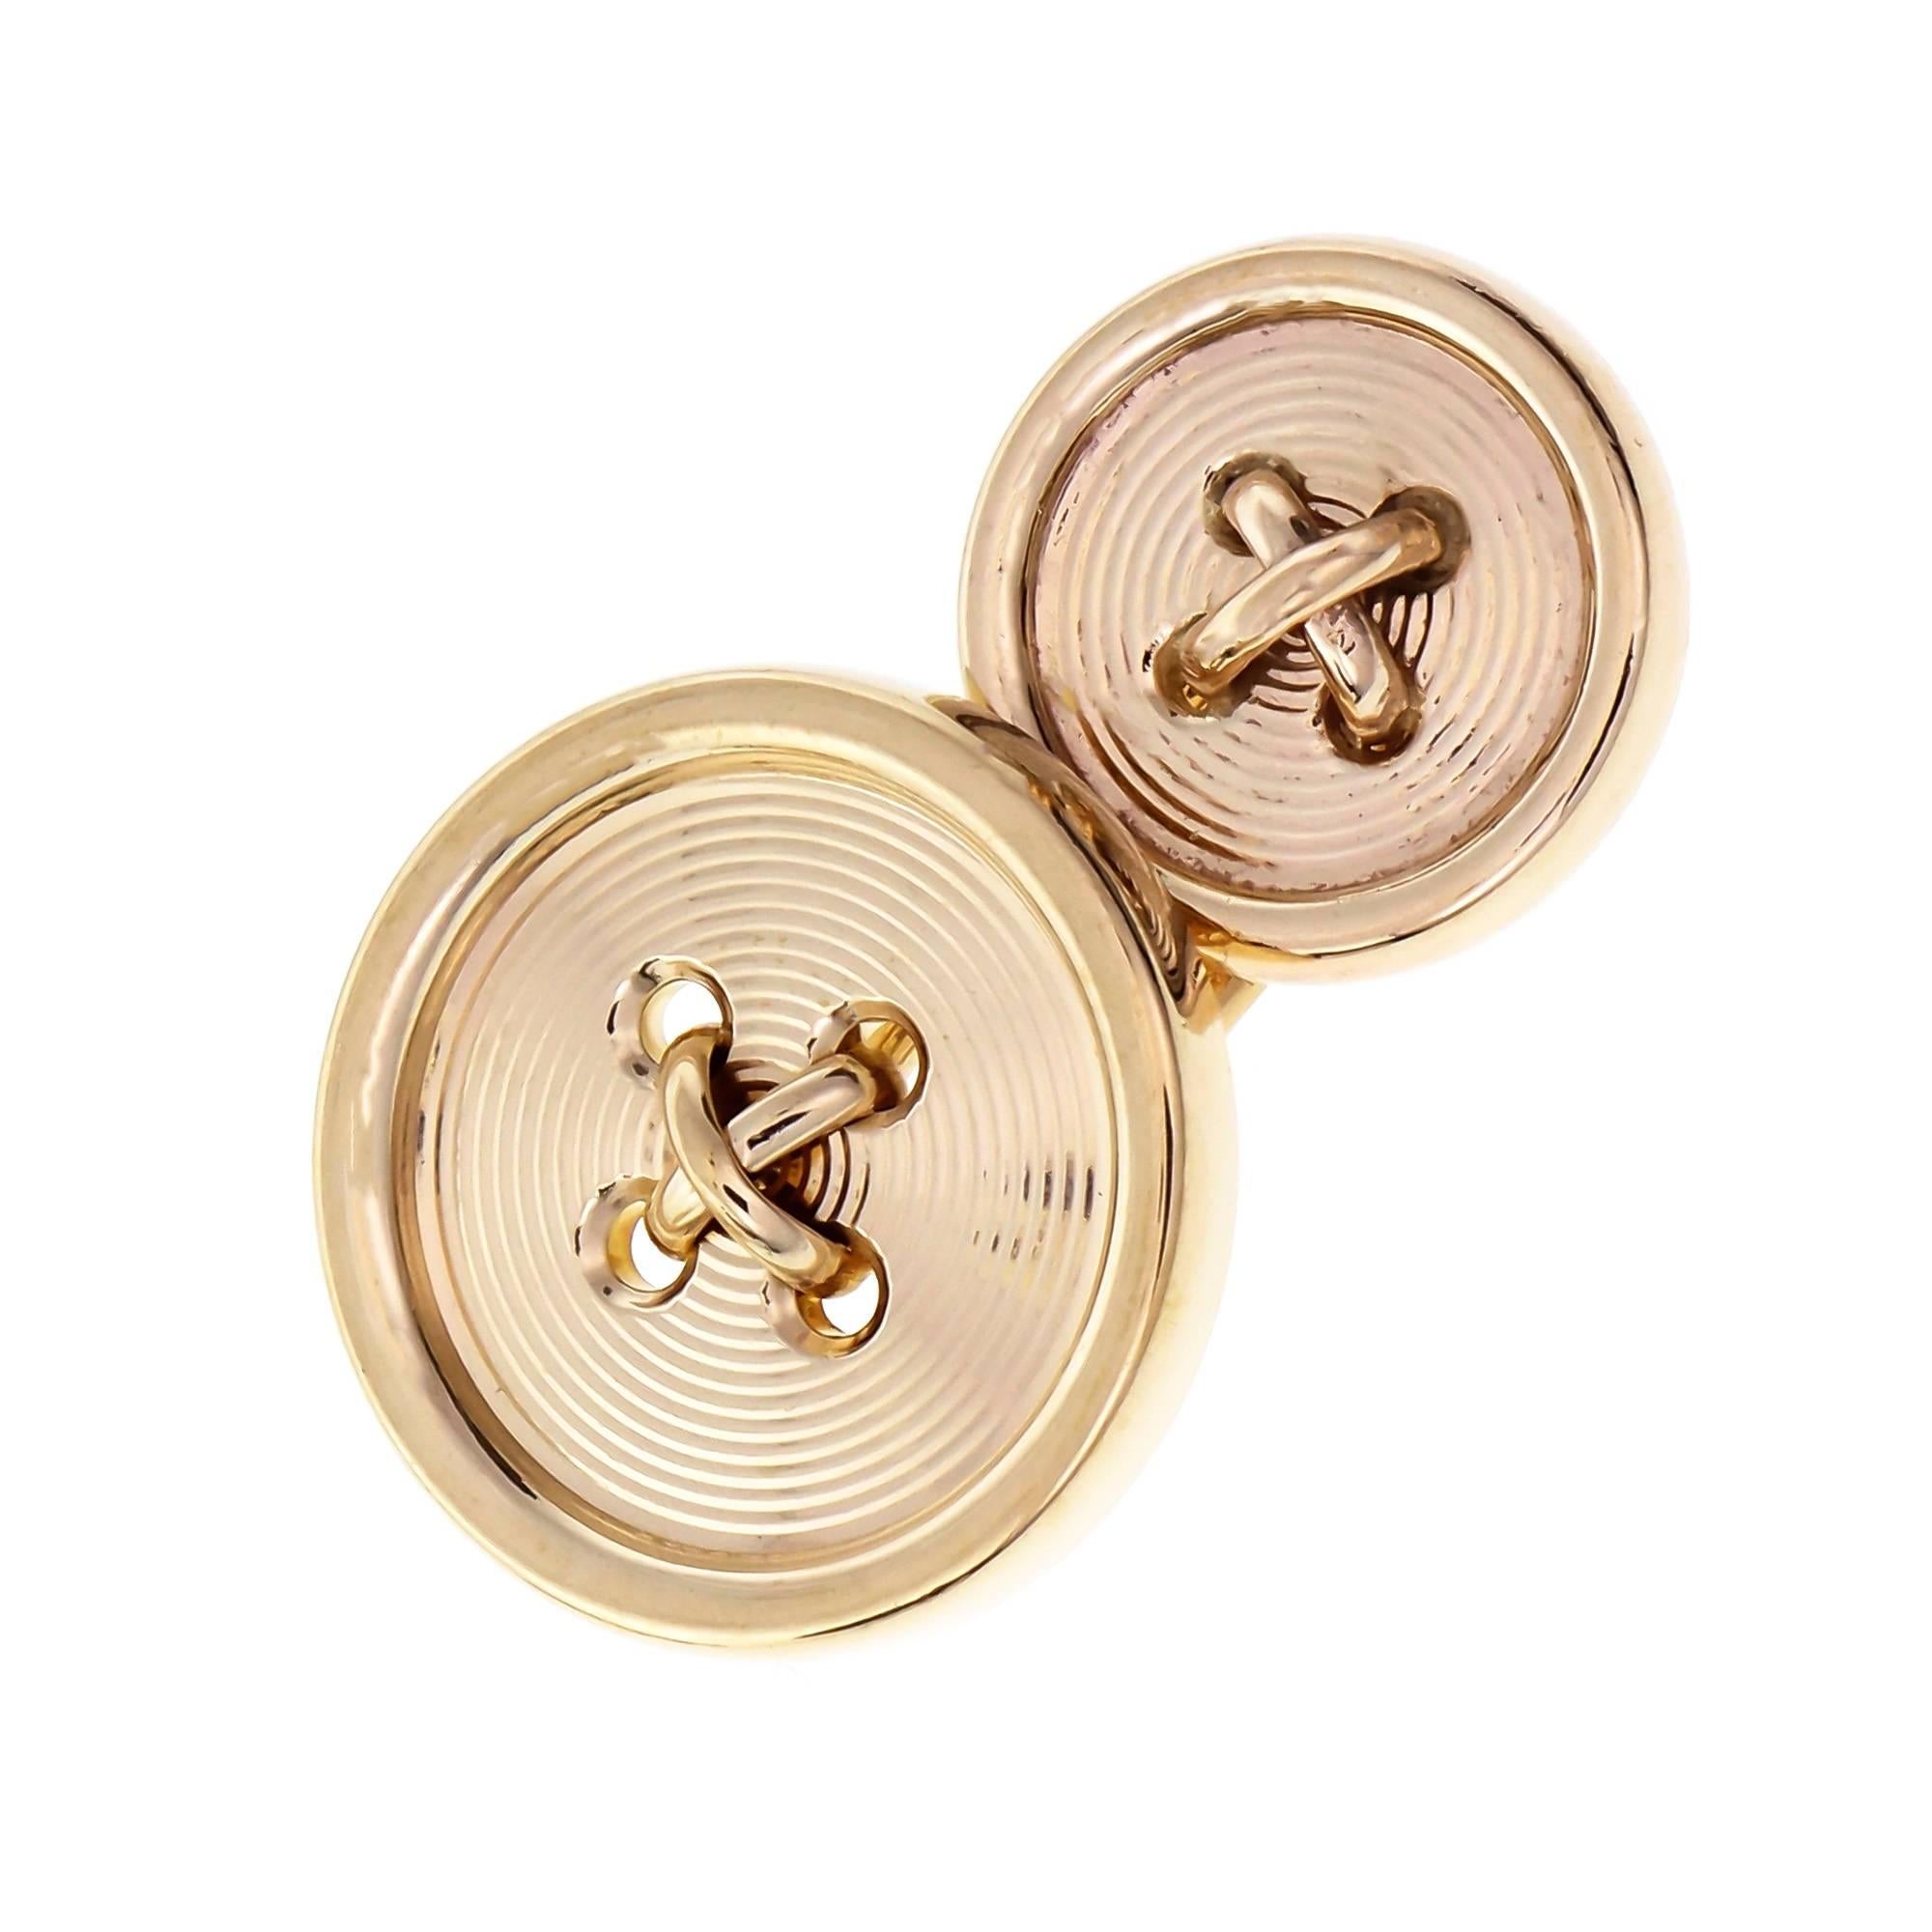  Tiffany & Co cufflinks. Button design double sided 14k yellow gold.

14k yellow gold
Front 
Top to bottom: 19.4mm or .76 inch 
Width: 19.4mm or .76 inch 
Depth: 6.2mm 
Back 
Top to bottom: 14.07mm or .55 inch 
Width: 14.21mm or .55 inch 
Depth: